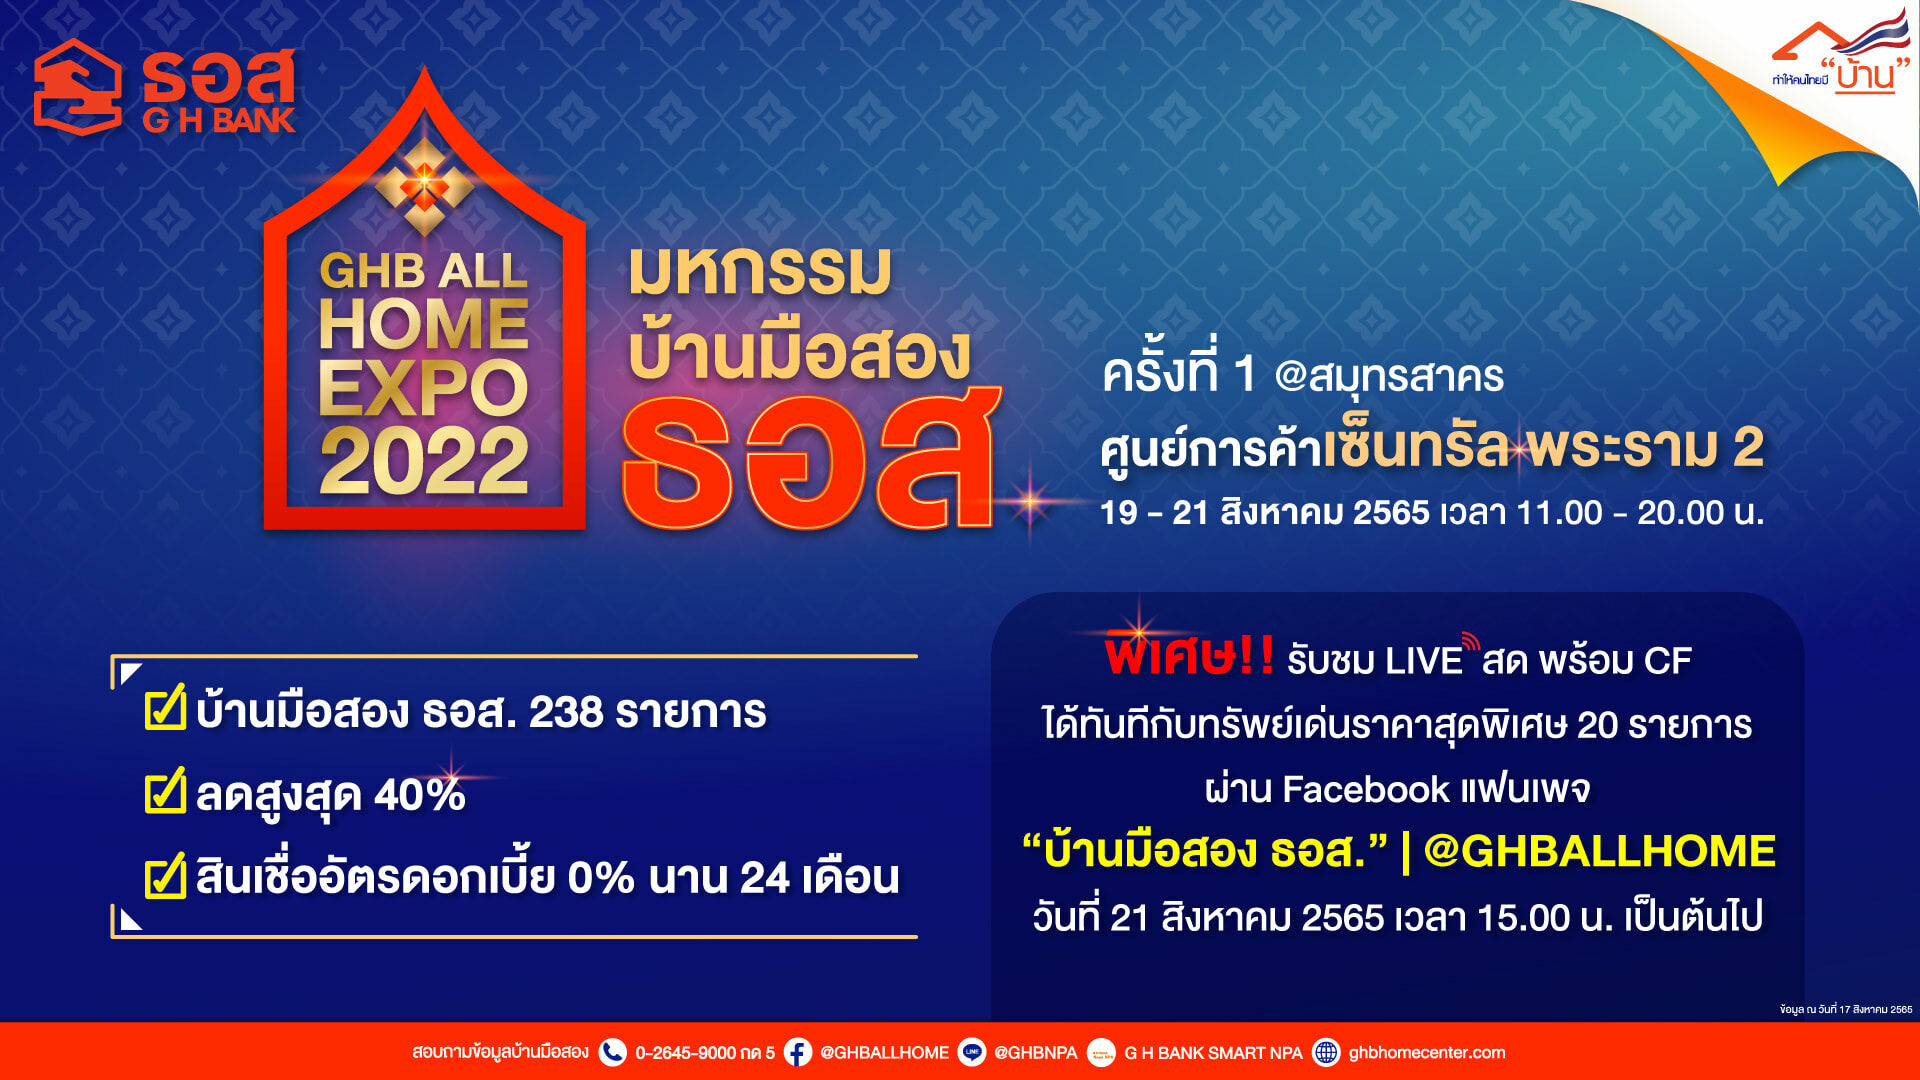 GHB ALL HOME EXPO 2022 สมุทรสาคร